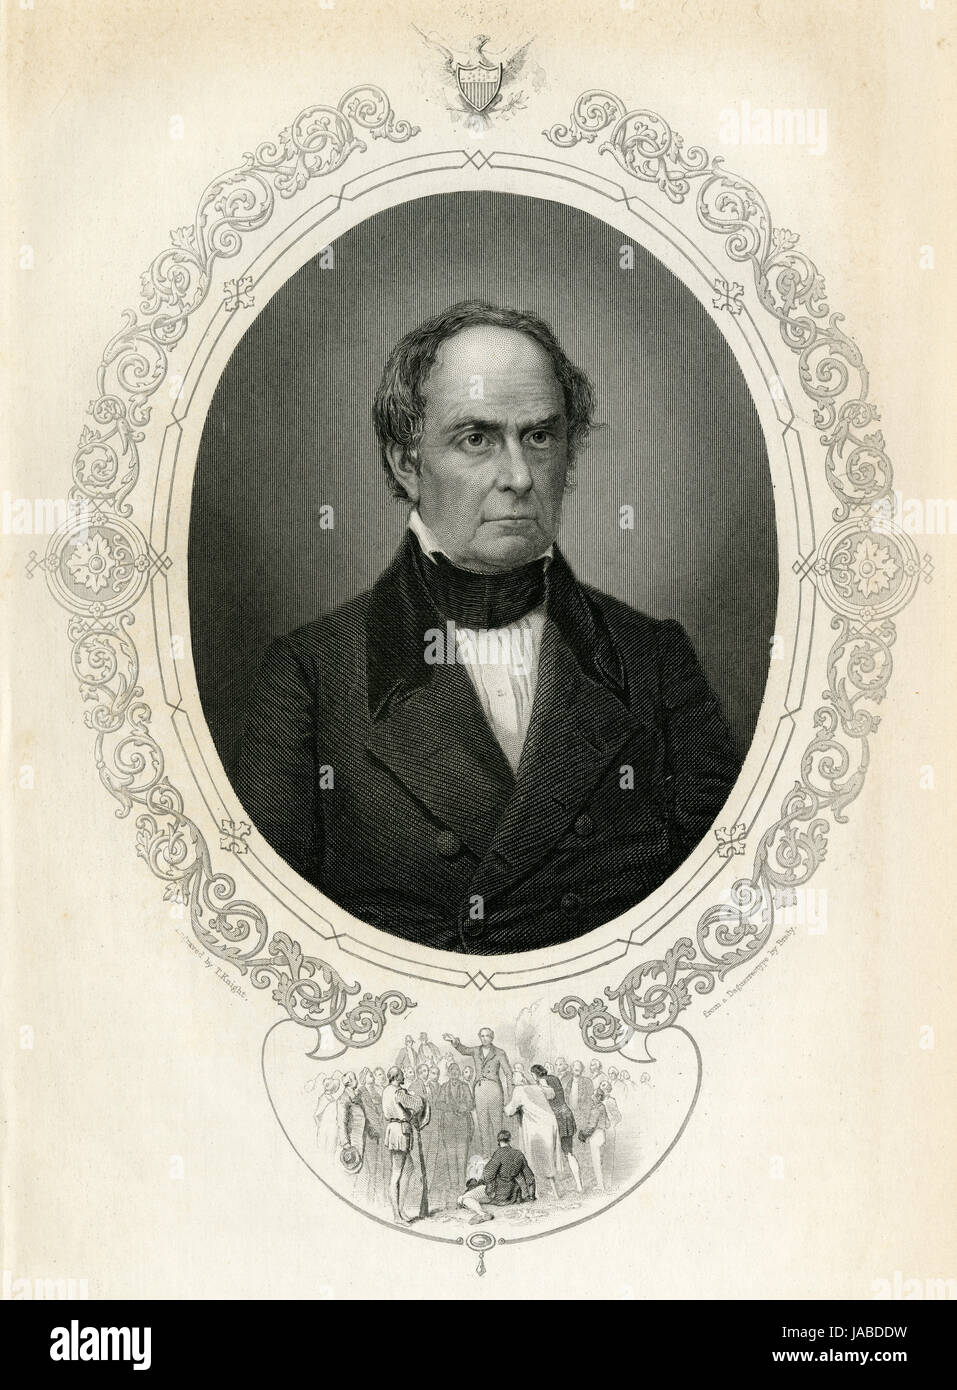 Antique c1860 engraving, Daniel Webster. Daniel Webster (1782-1852) was an American politician who served in the United States House of Representatives, the U.S. Senate, and was twice the United States Secretary of State. SOURCE: ORIGINAL ENGRAVING. Stock Photo